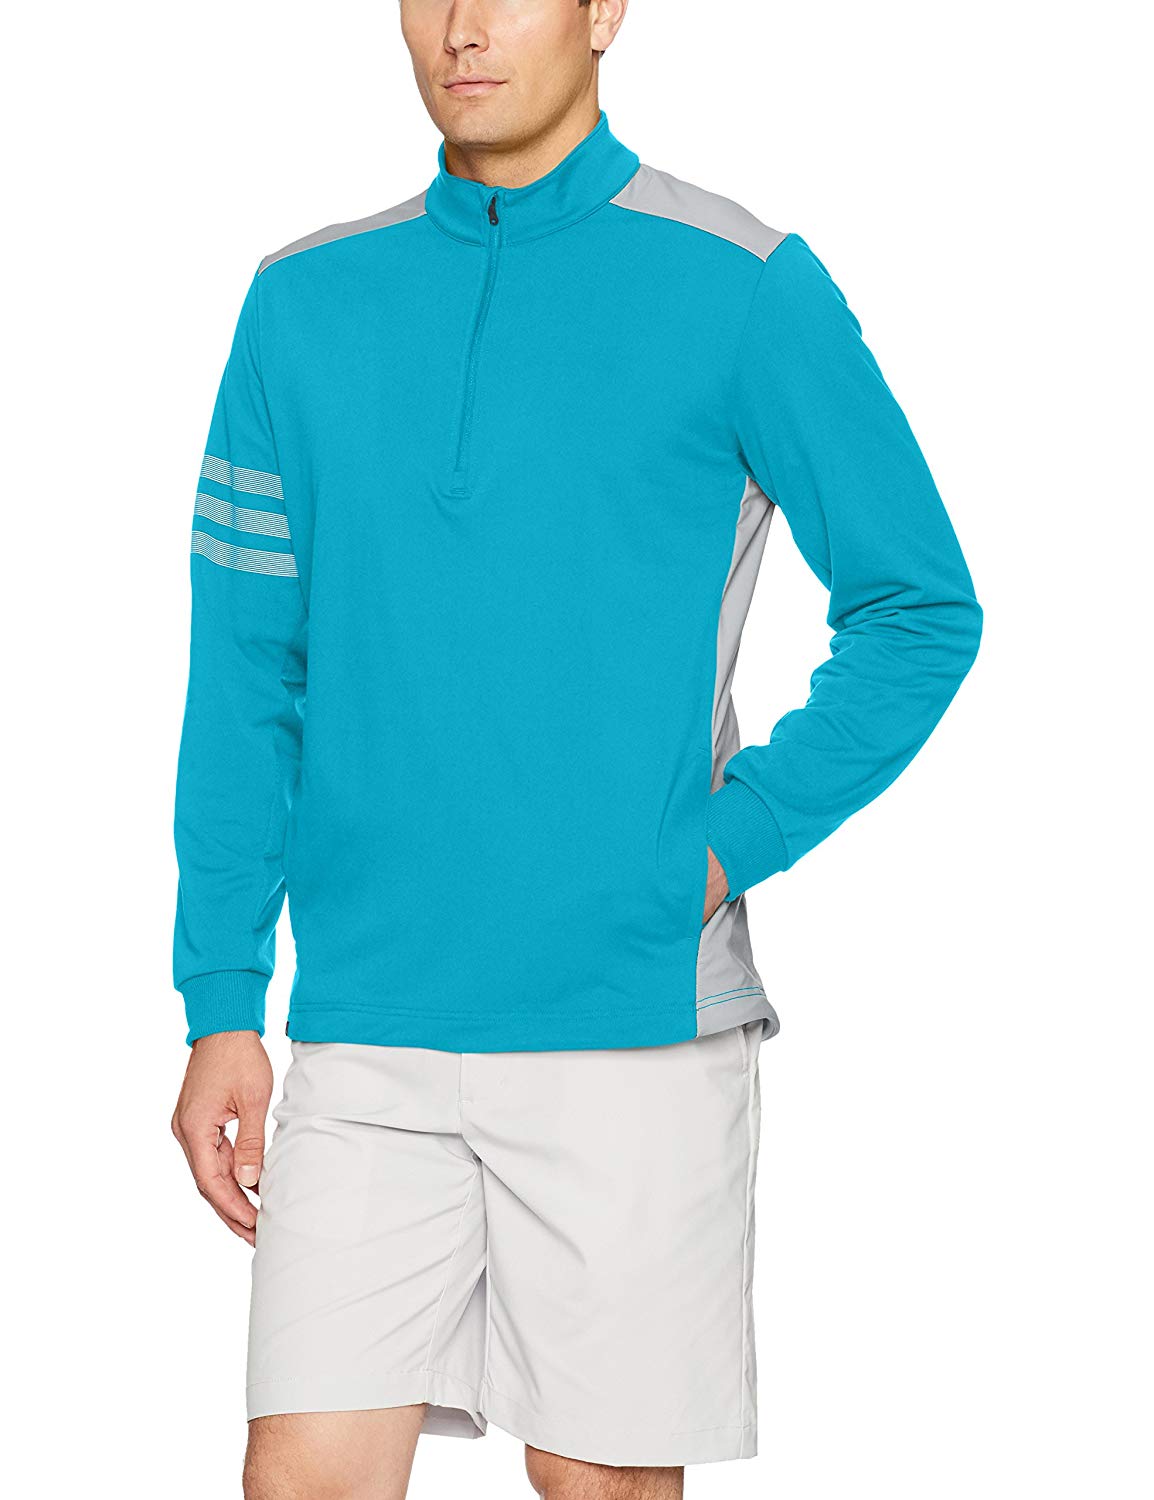 Adidas Mens Competition 3 Stripe Quarter Zip Golf Pullovers